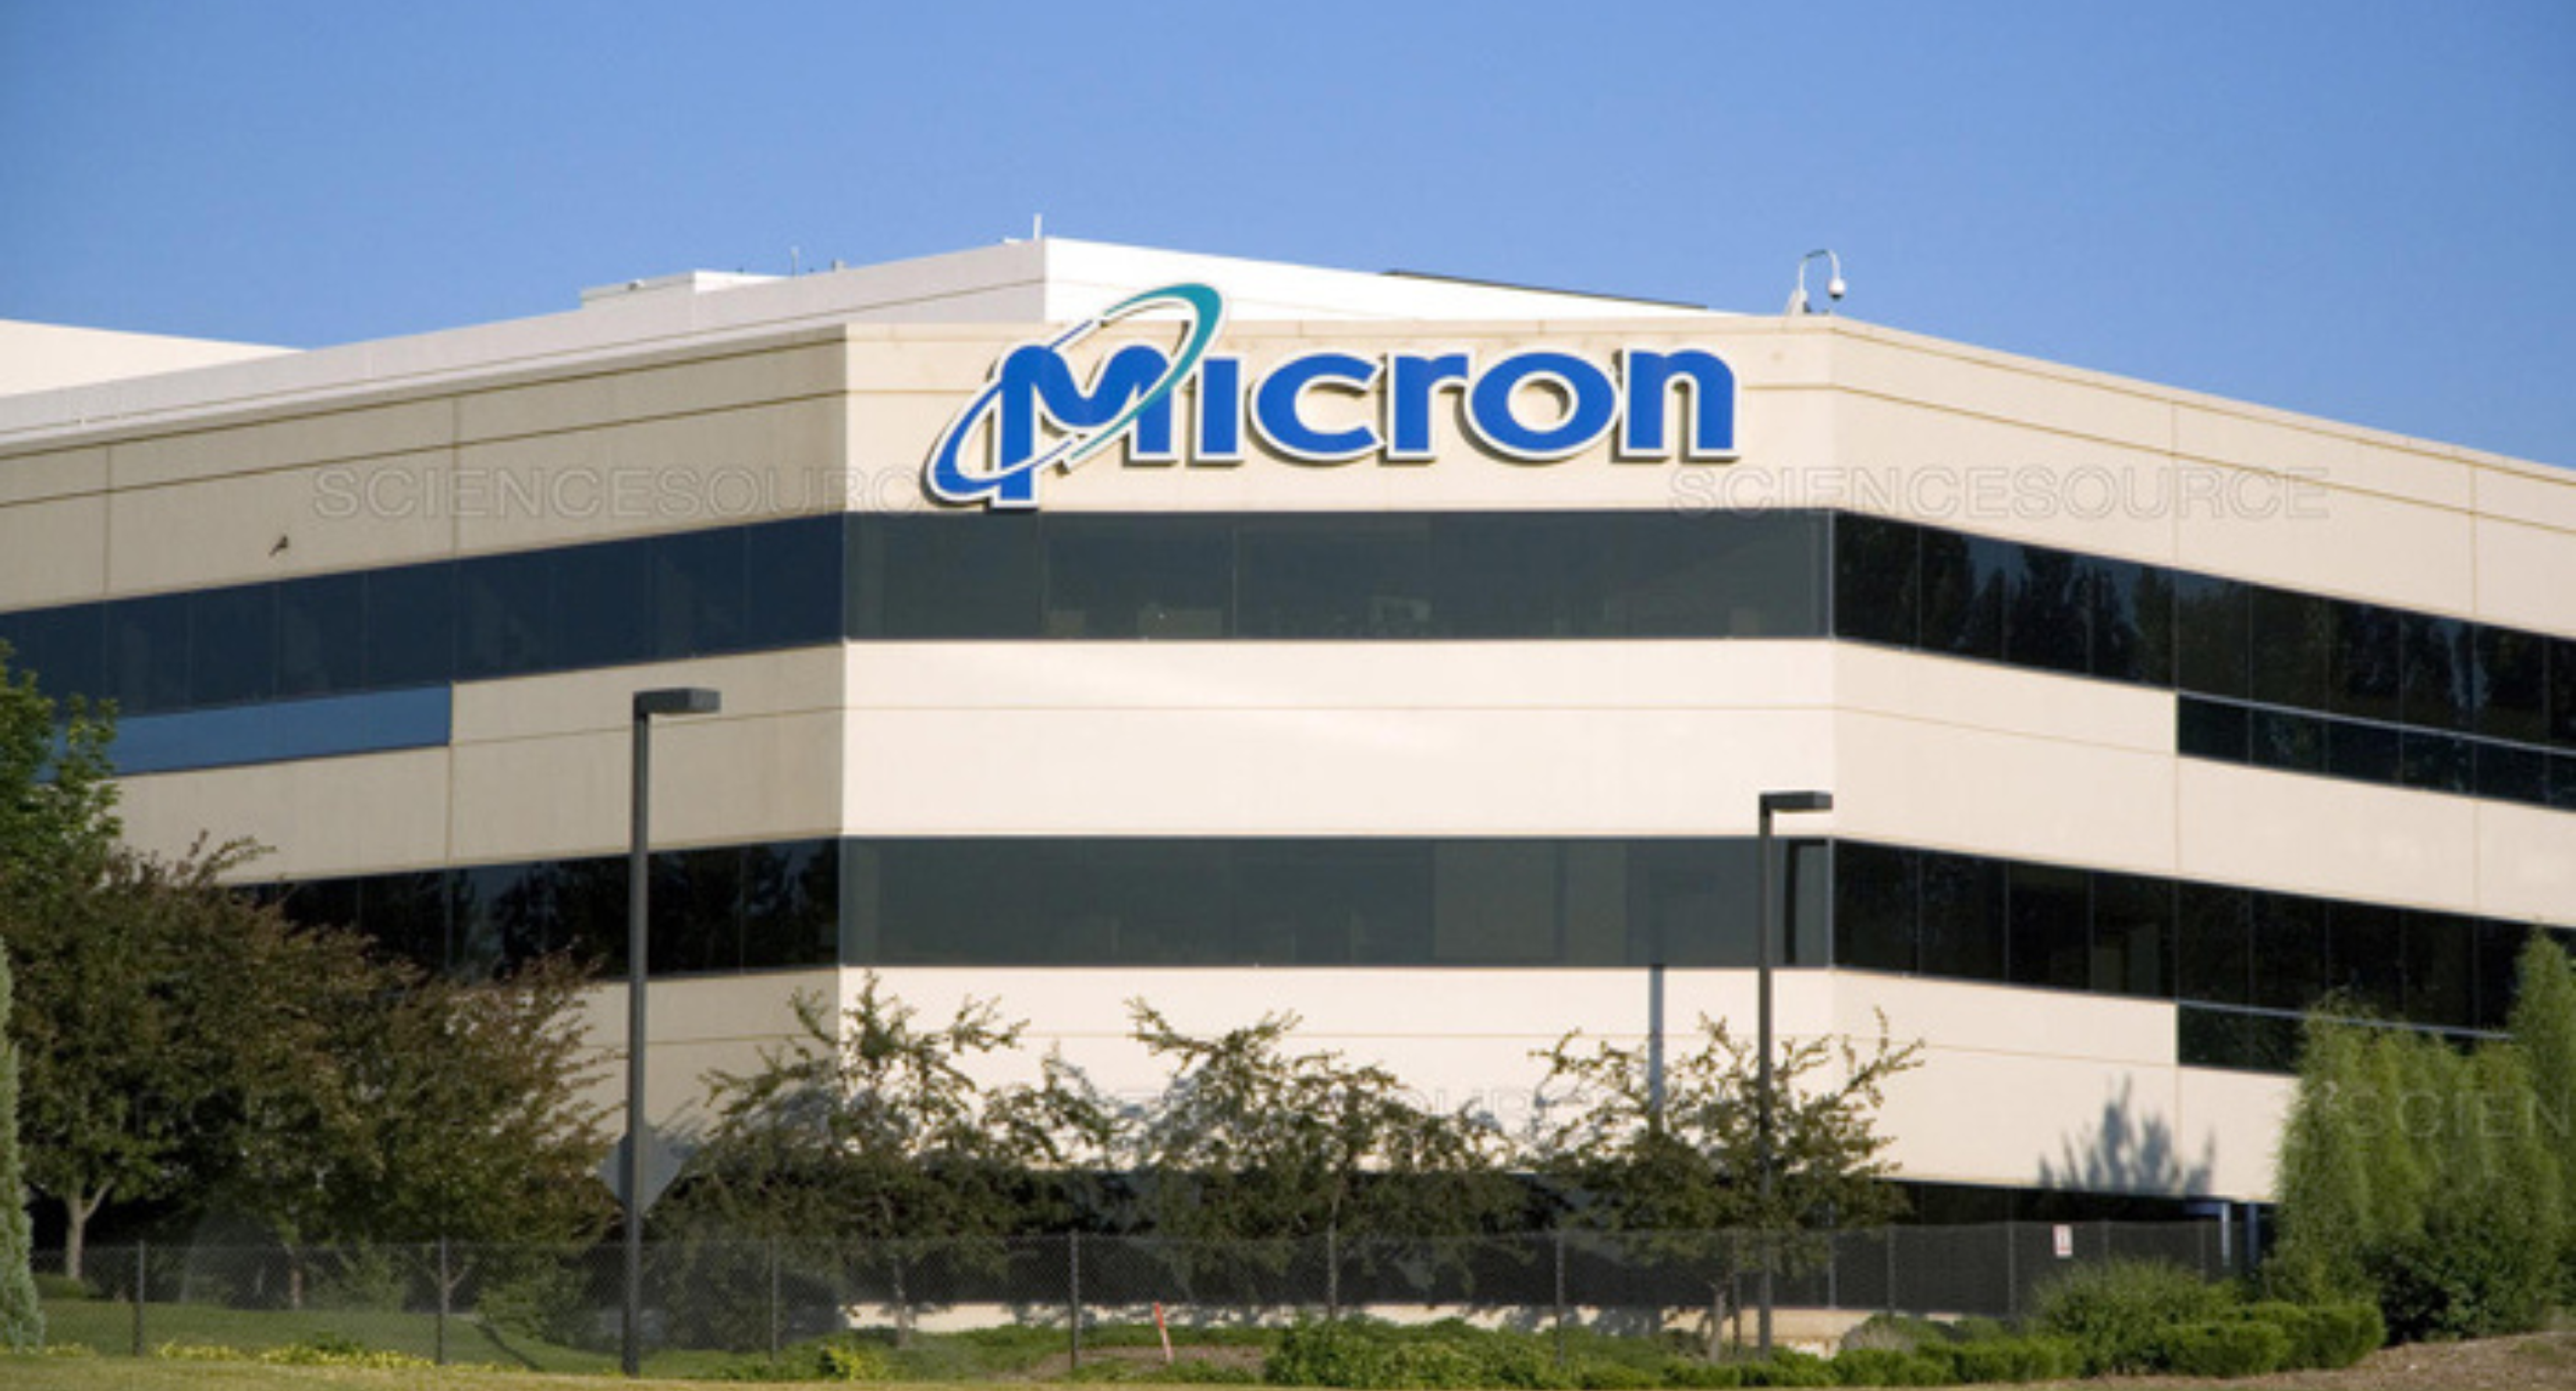 Tailwinds Ahead for Micron: Analysts Gauge the Impact of DRAM Inventory, Samsung&#39;s Supply Cuts, and SSD Pricing Dynamics